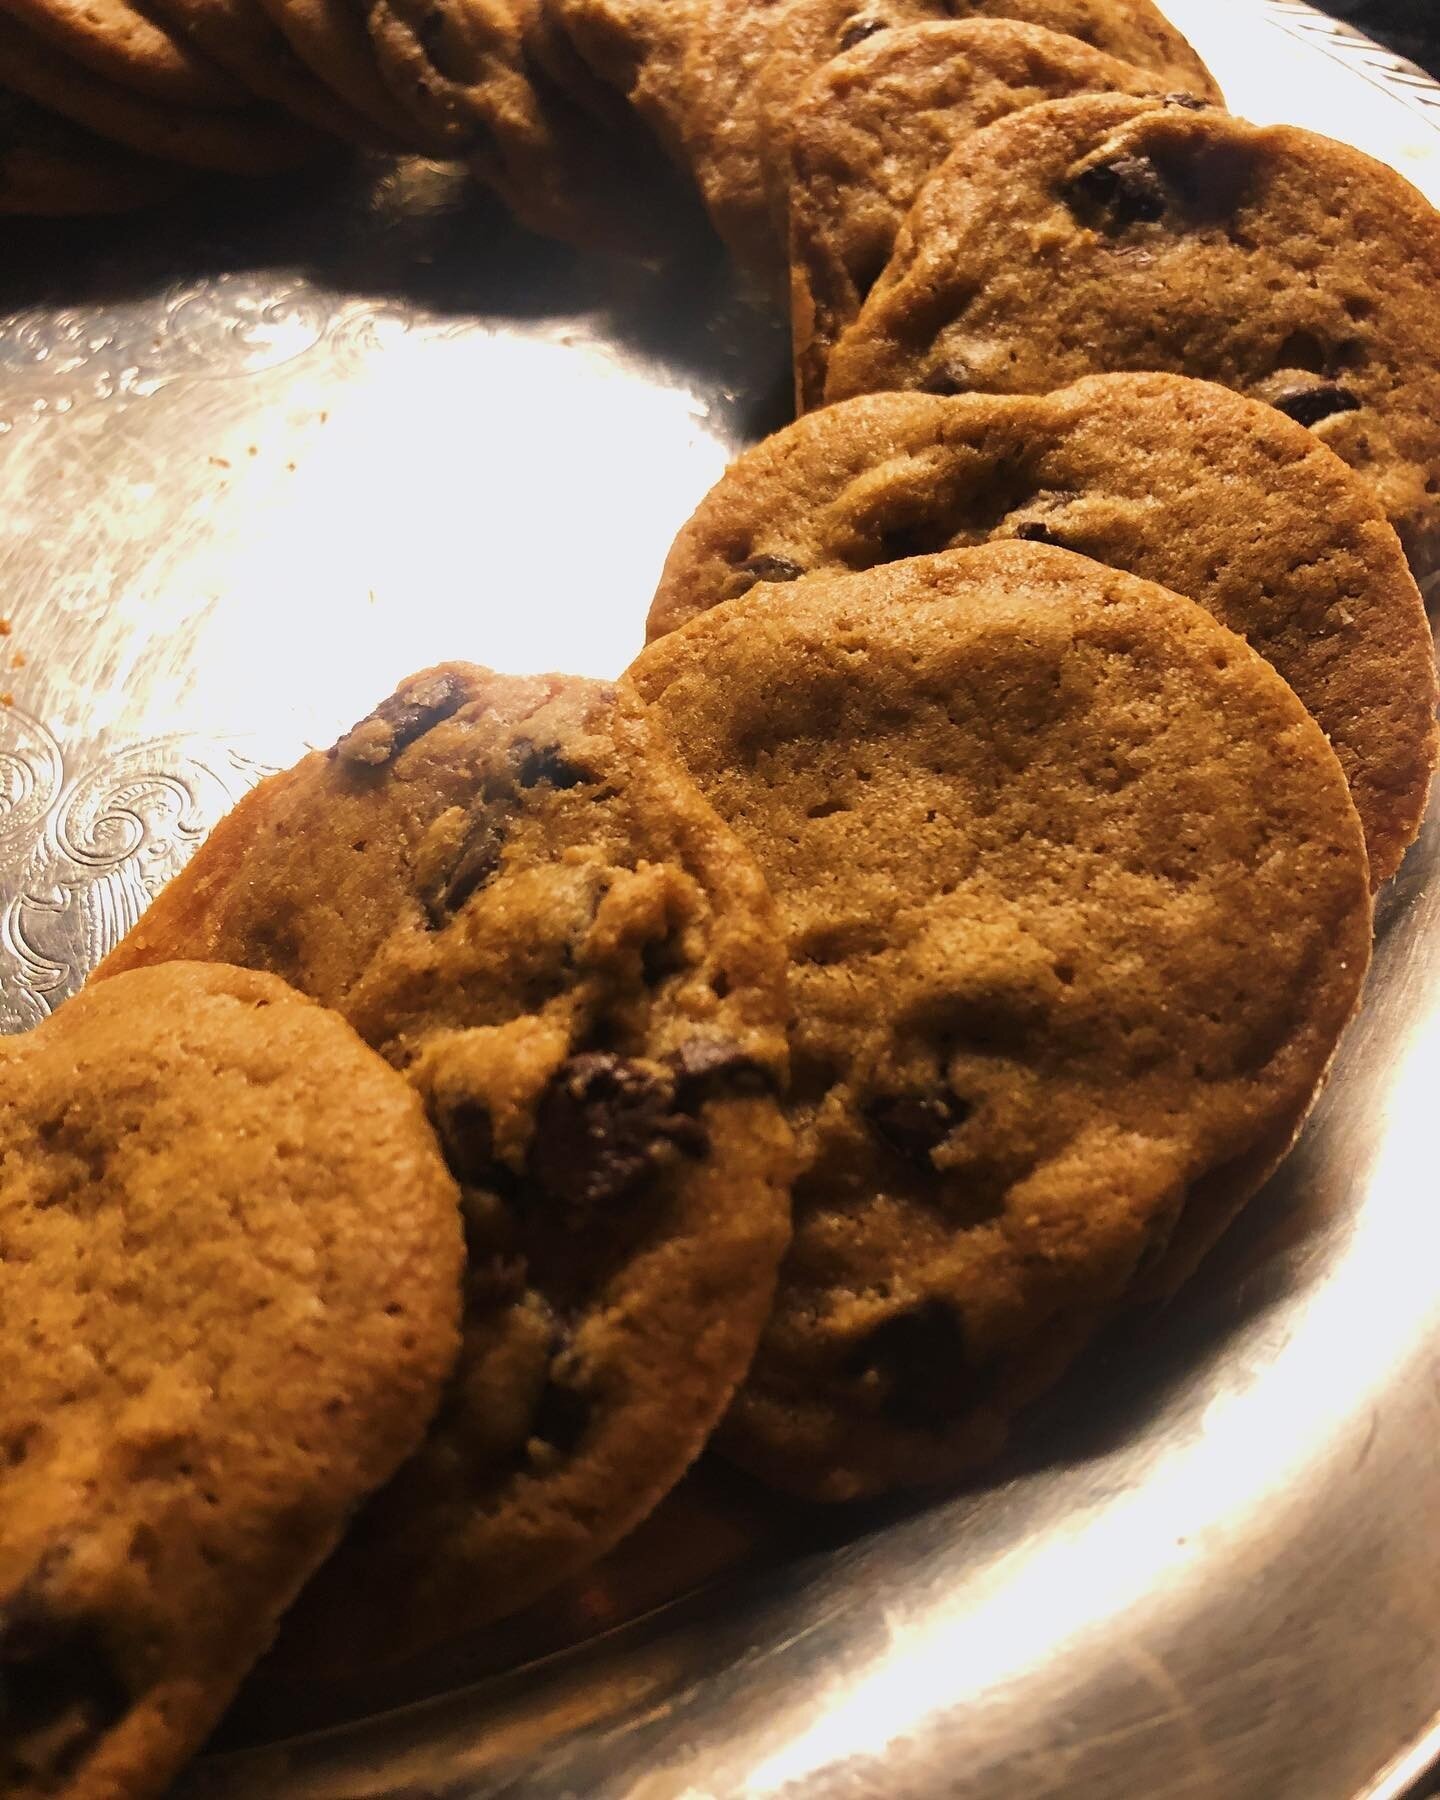 It&rsquo;s finally the weekend! And weekends mean we&rsquo;re open for brunch, dinner, and a late night light bite! Brunch goes 11am-4pm. Our late night menu kicks off at 11pm. If you stick around late enough, the fresh baked cookies come out at Midn